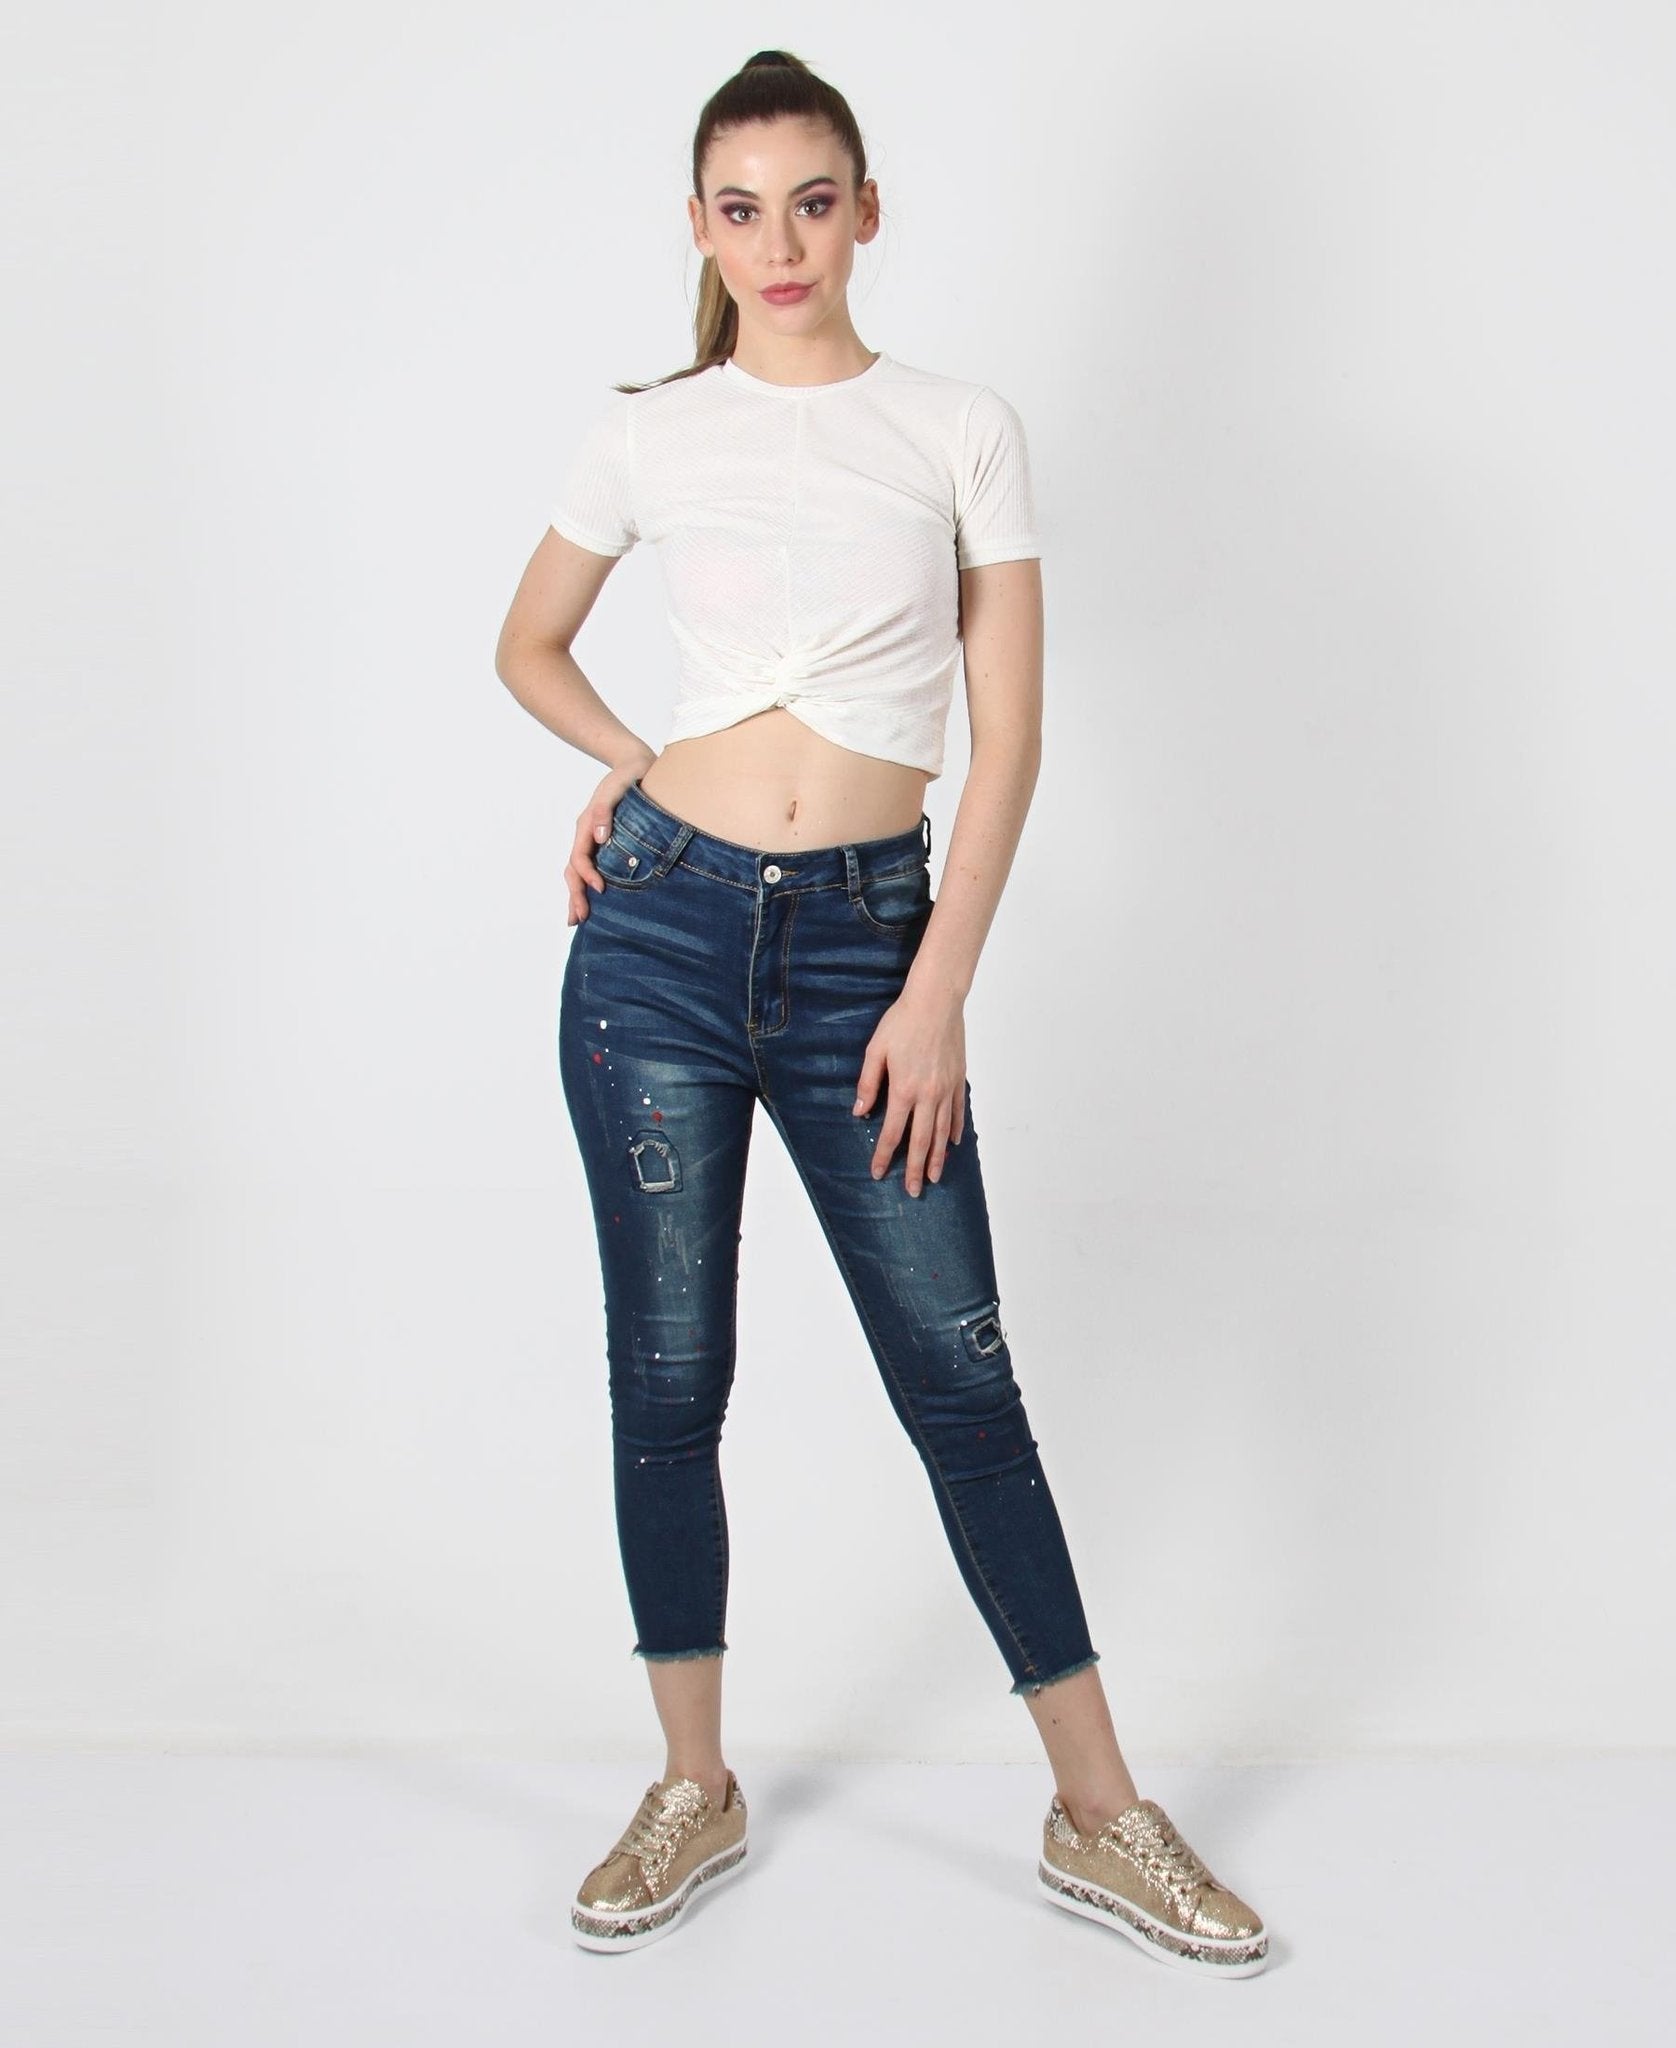 KNOT FRONT CROP TOP - WHITE